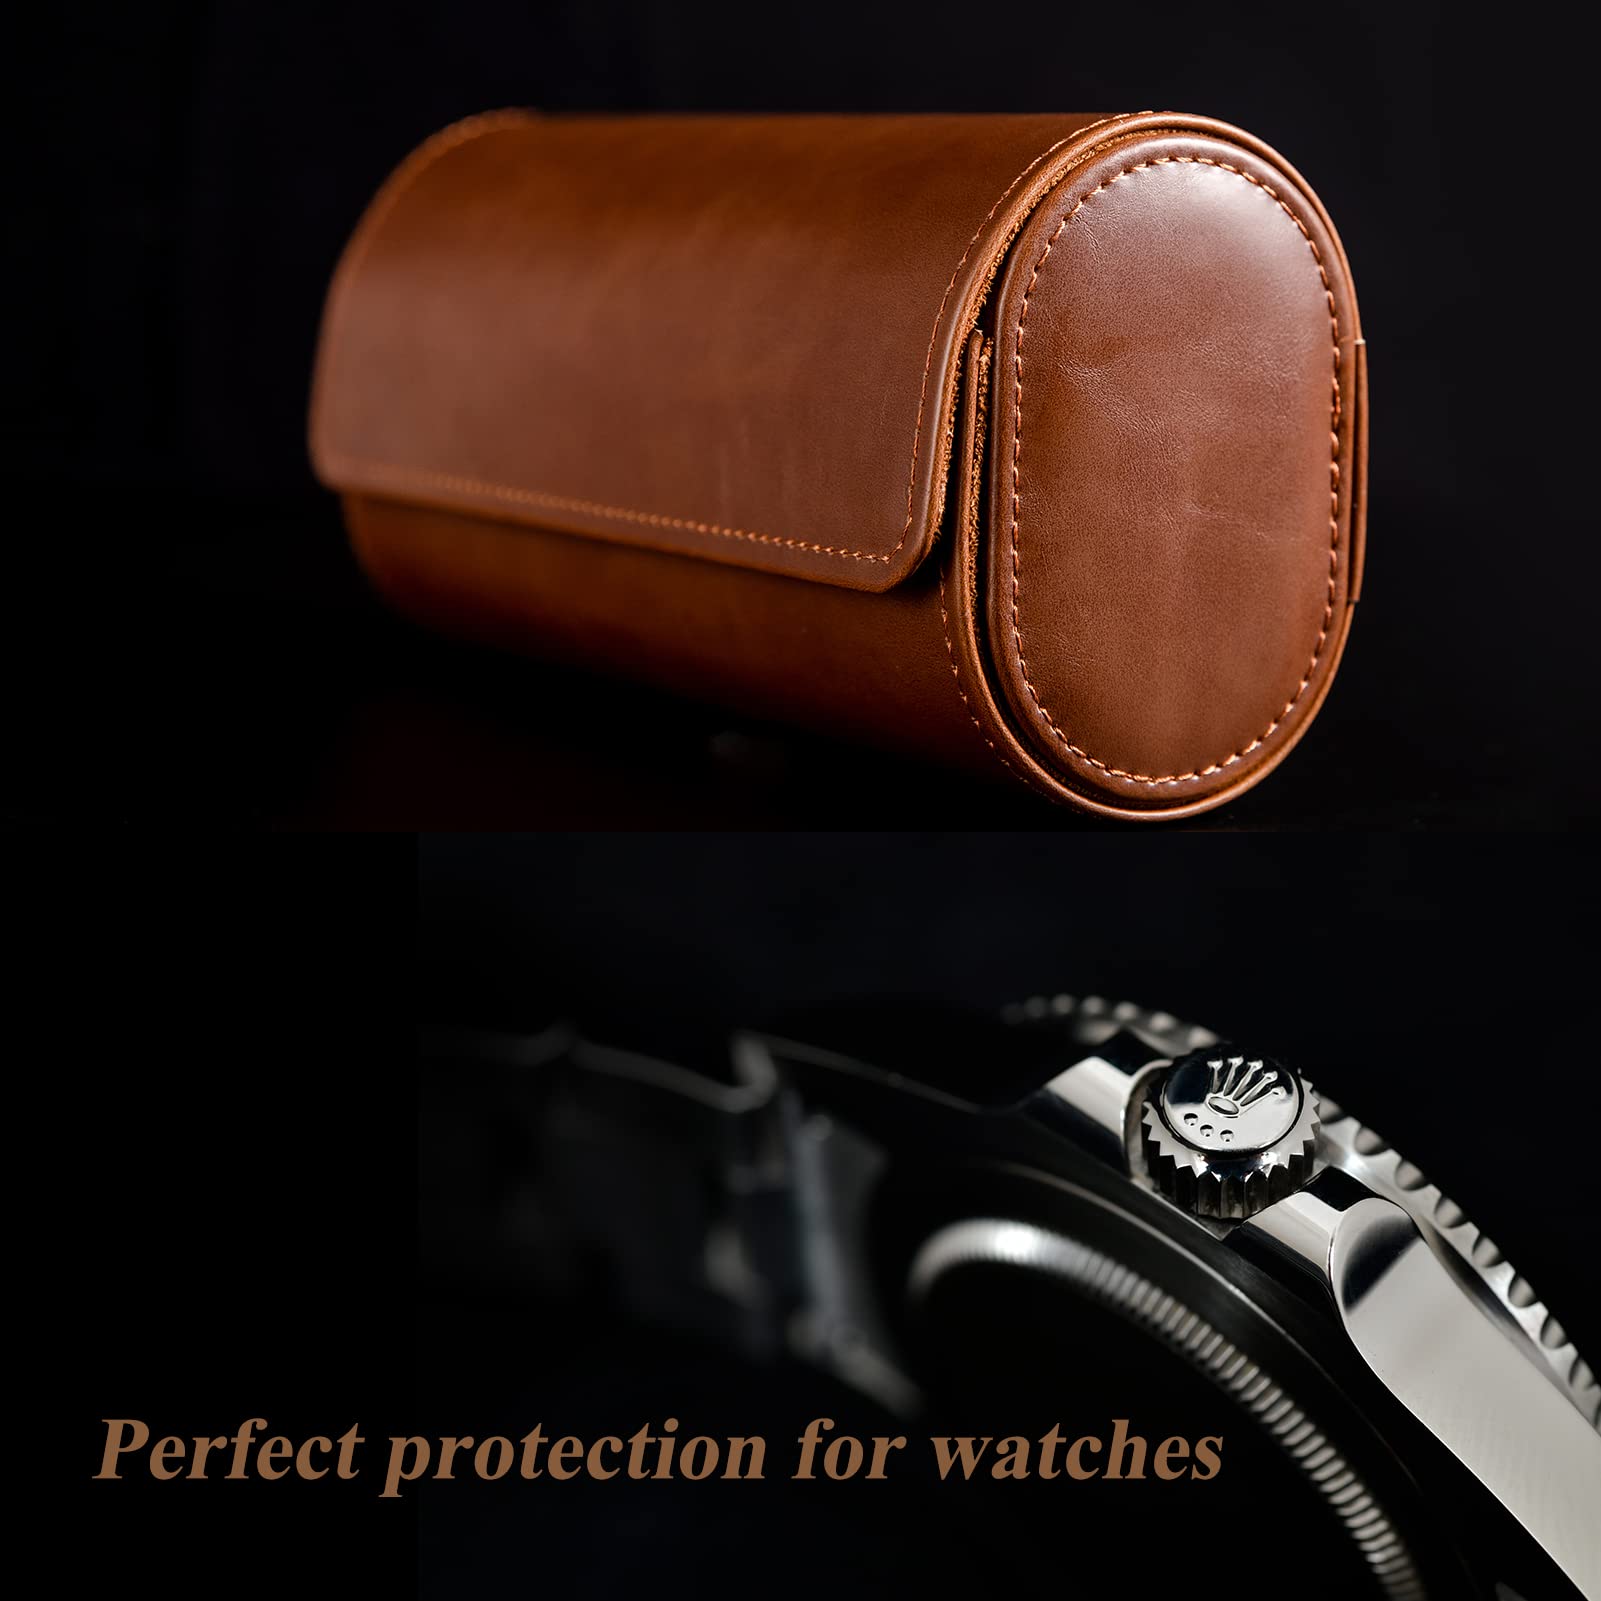 Mr.Okay 2 Watch Travel Case -Premium Leather Watch Case With Perfect Texture.(Watch Carrying Case Or Organizer For Storage And Display). Mens Watch Case for Travel Handcrafted by Craftsmen.